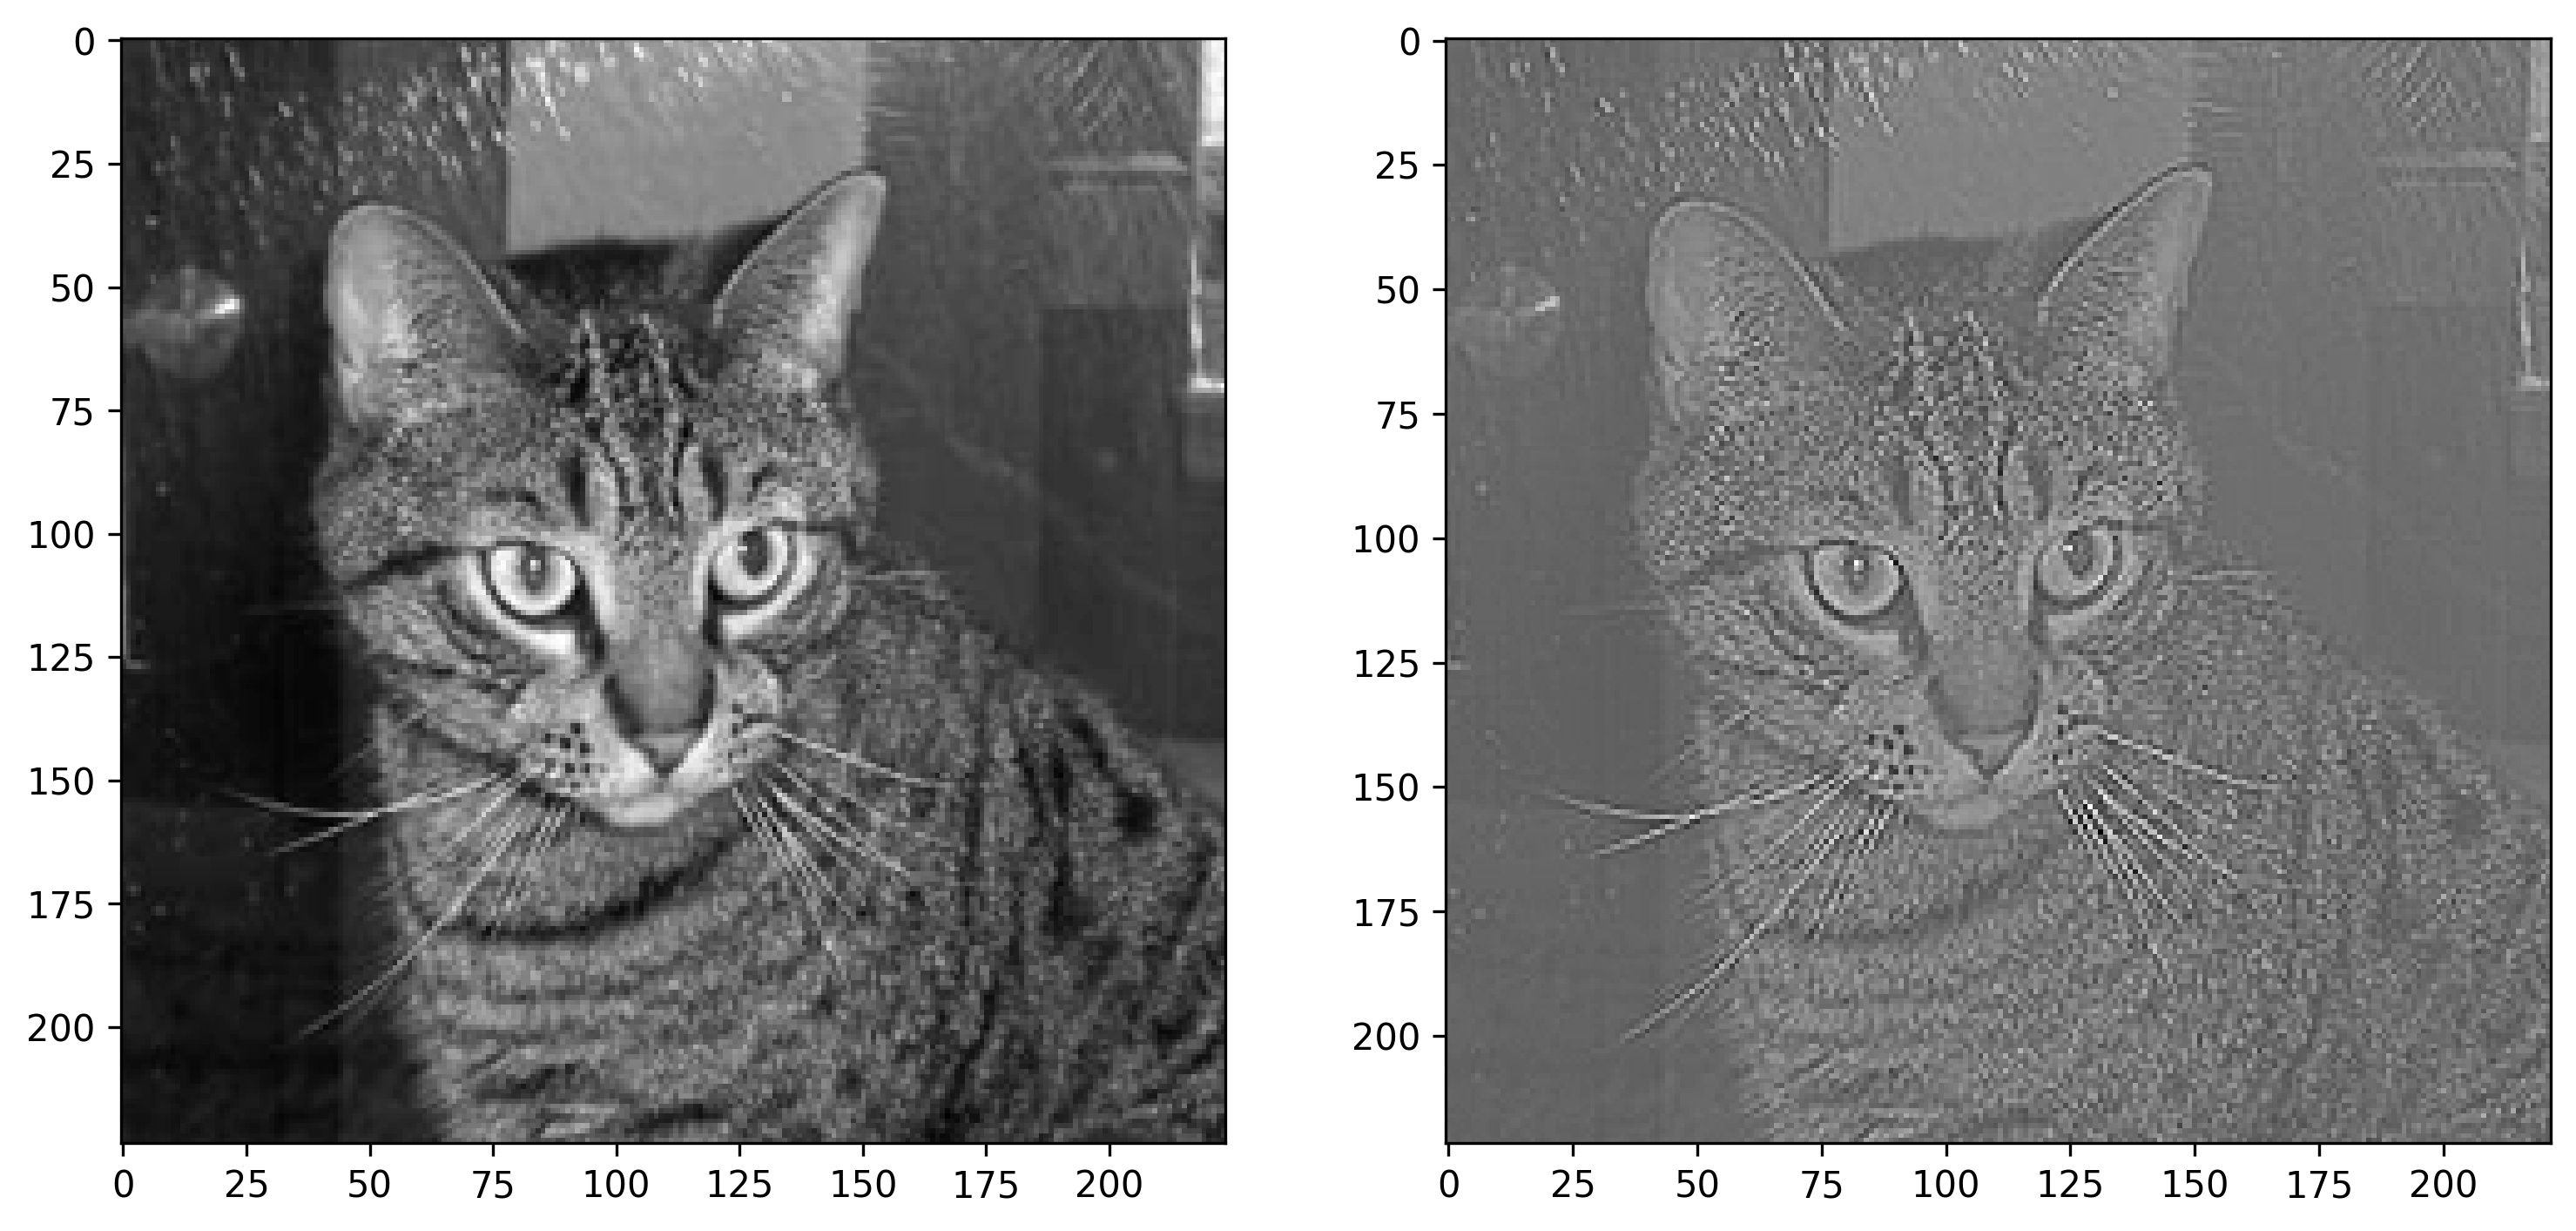 Image 8 — Cat image before and after sharpening (image by author)